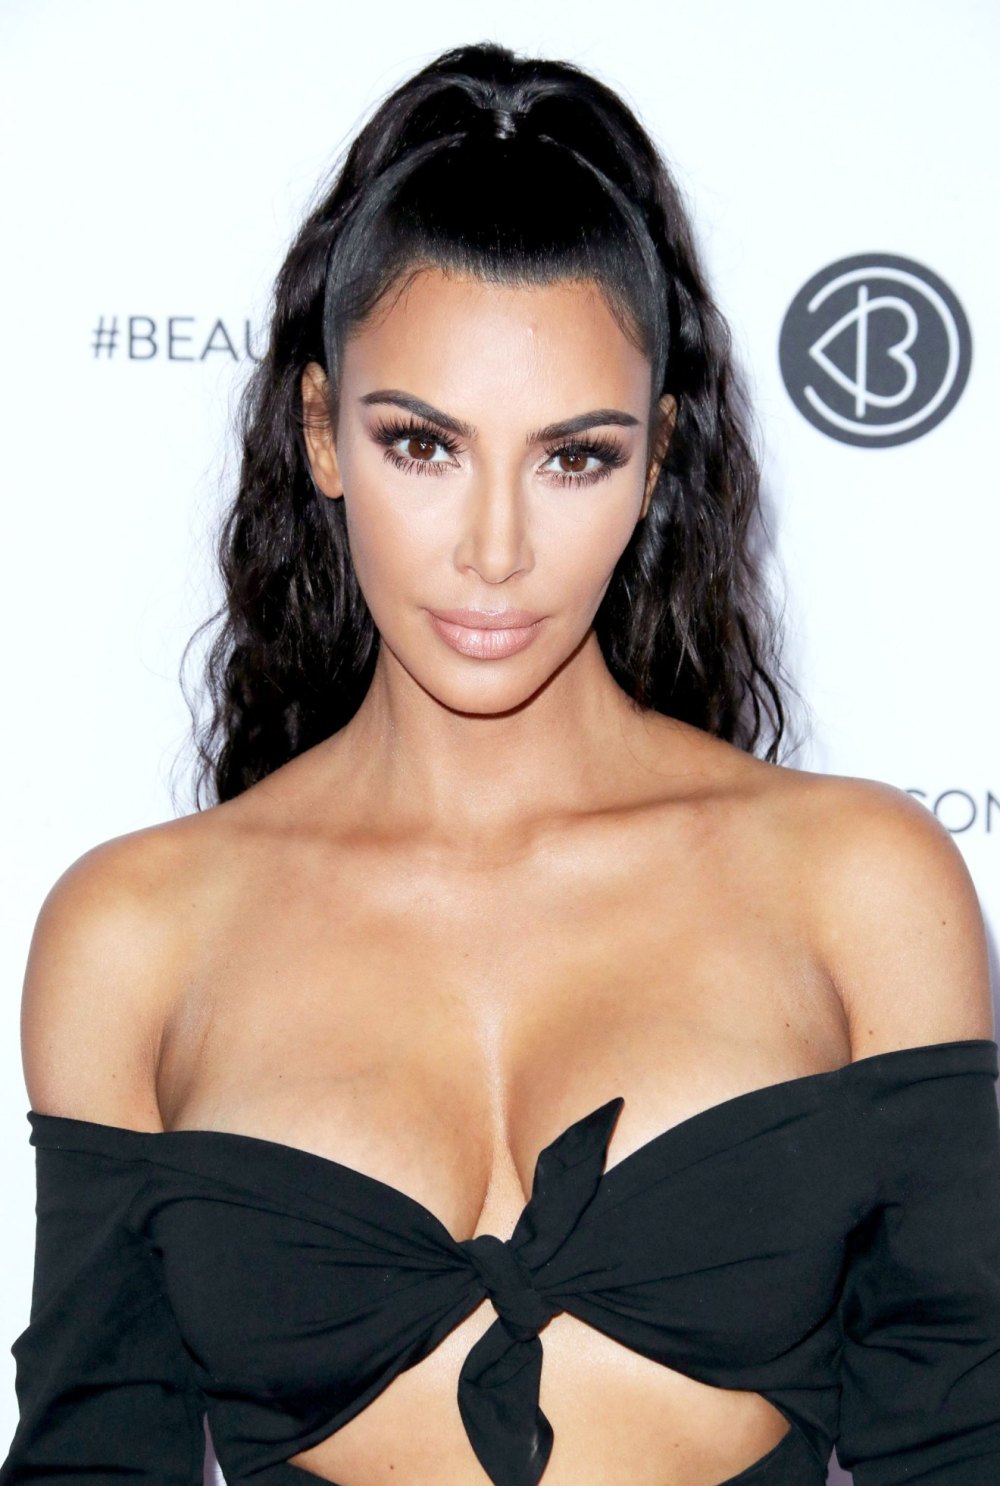 Kim Kardashian Is Expanding Skims With a Swim and Men's Line 'Very Soon'